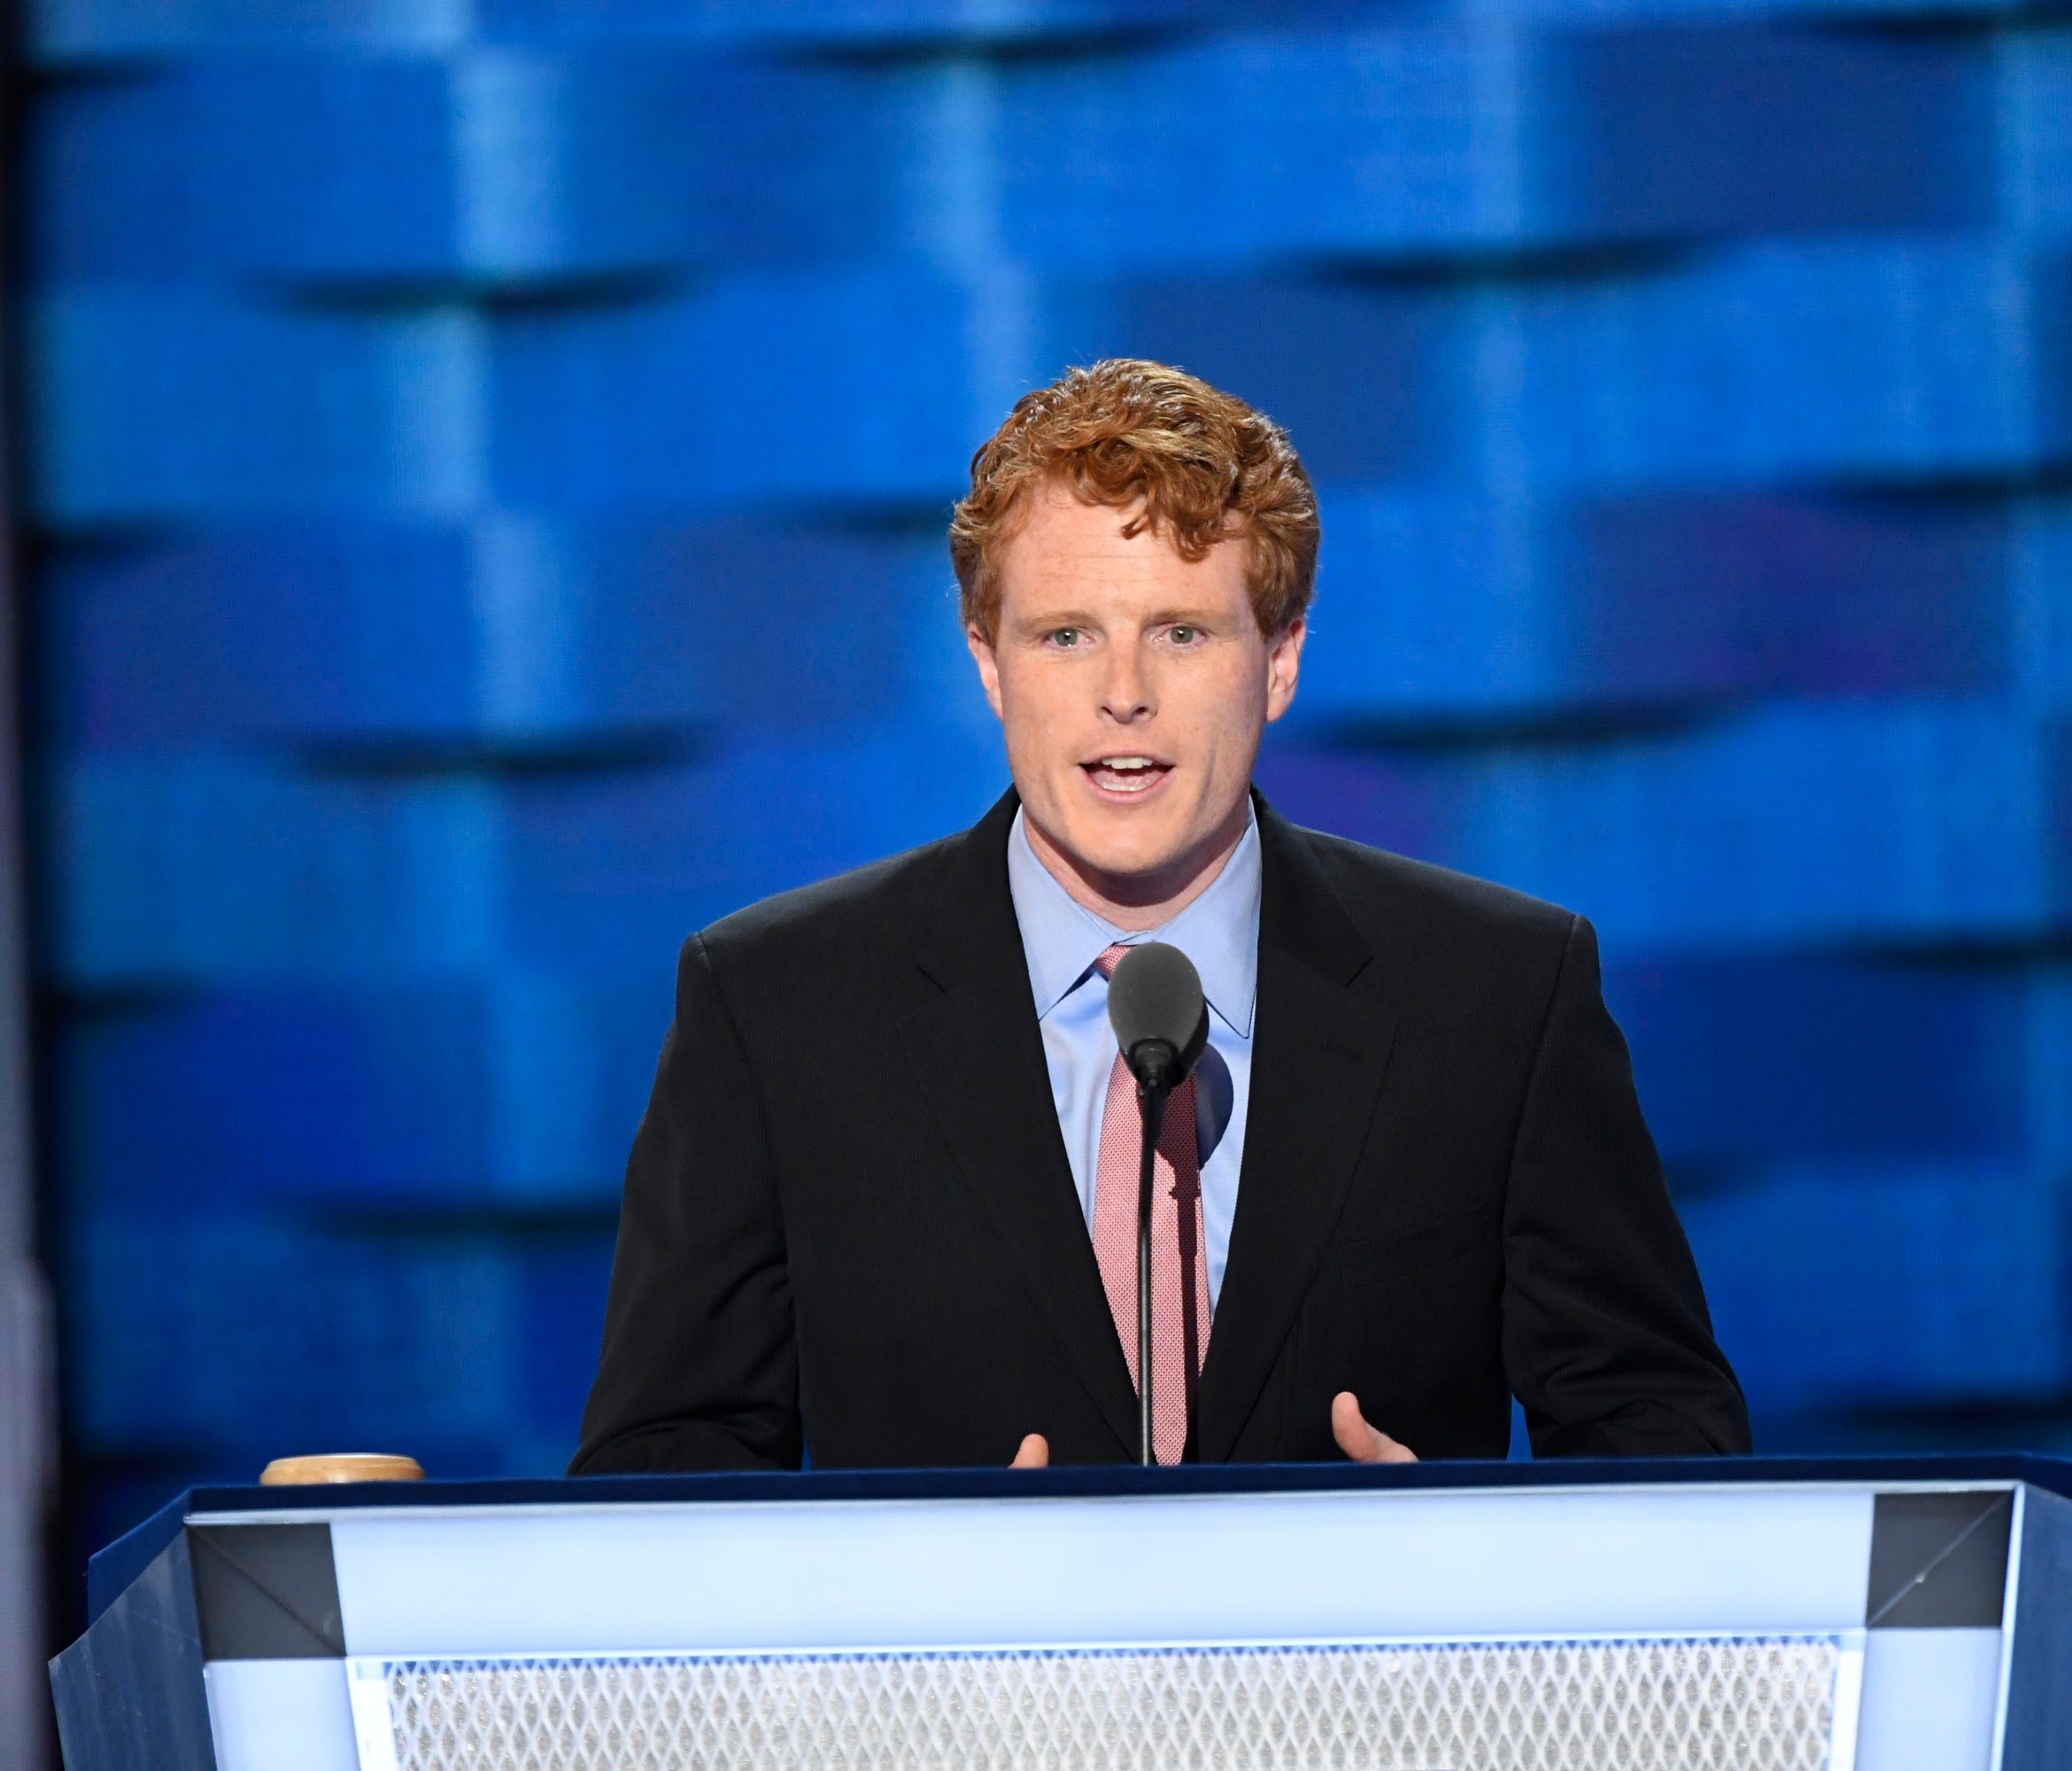 File photo: Rep. Joseph P. Kennedy, III, D-Mass., speaks during the 2016 Democratic National Convention.